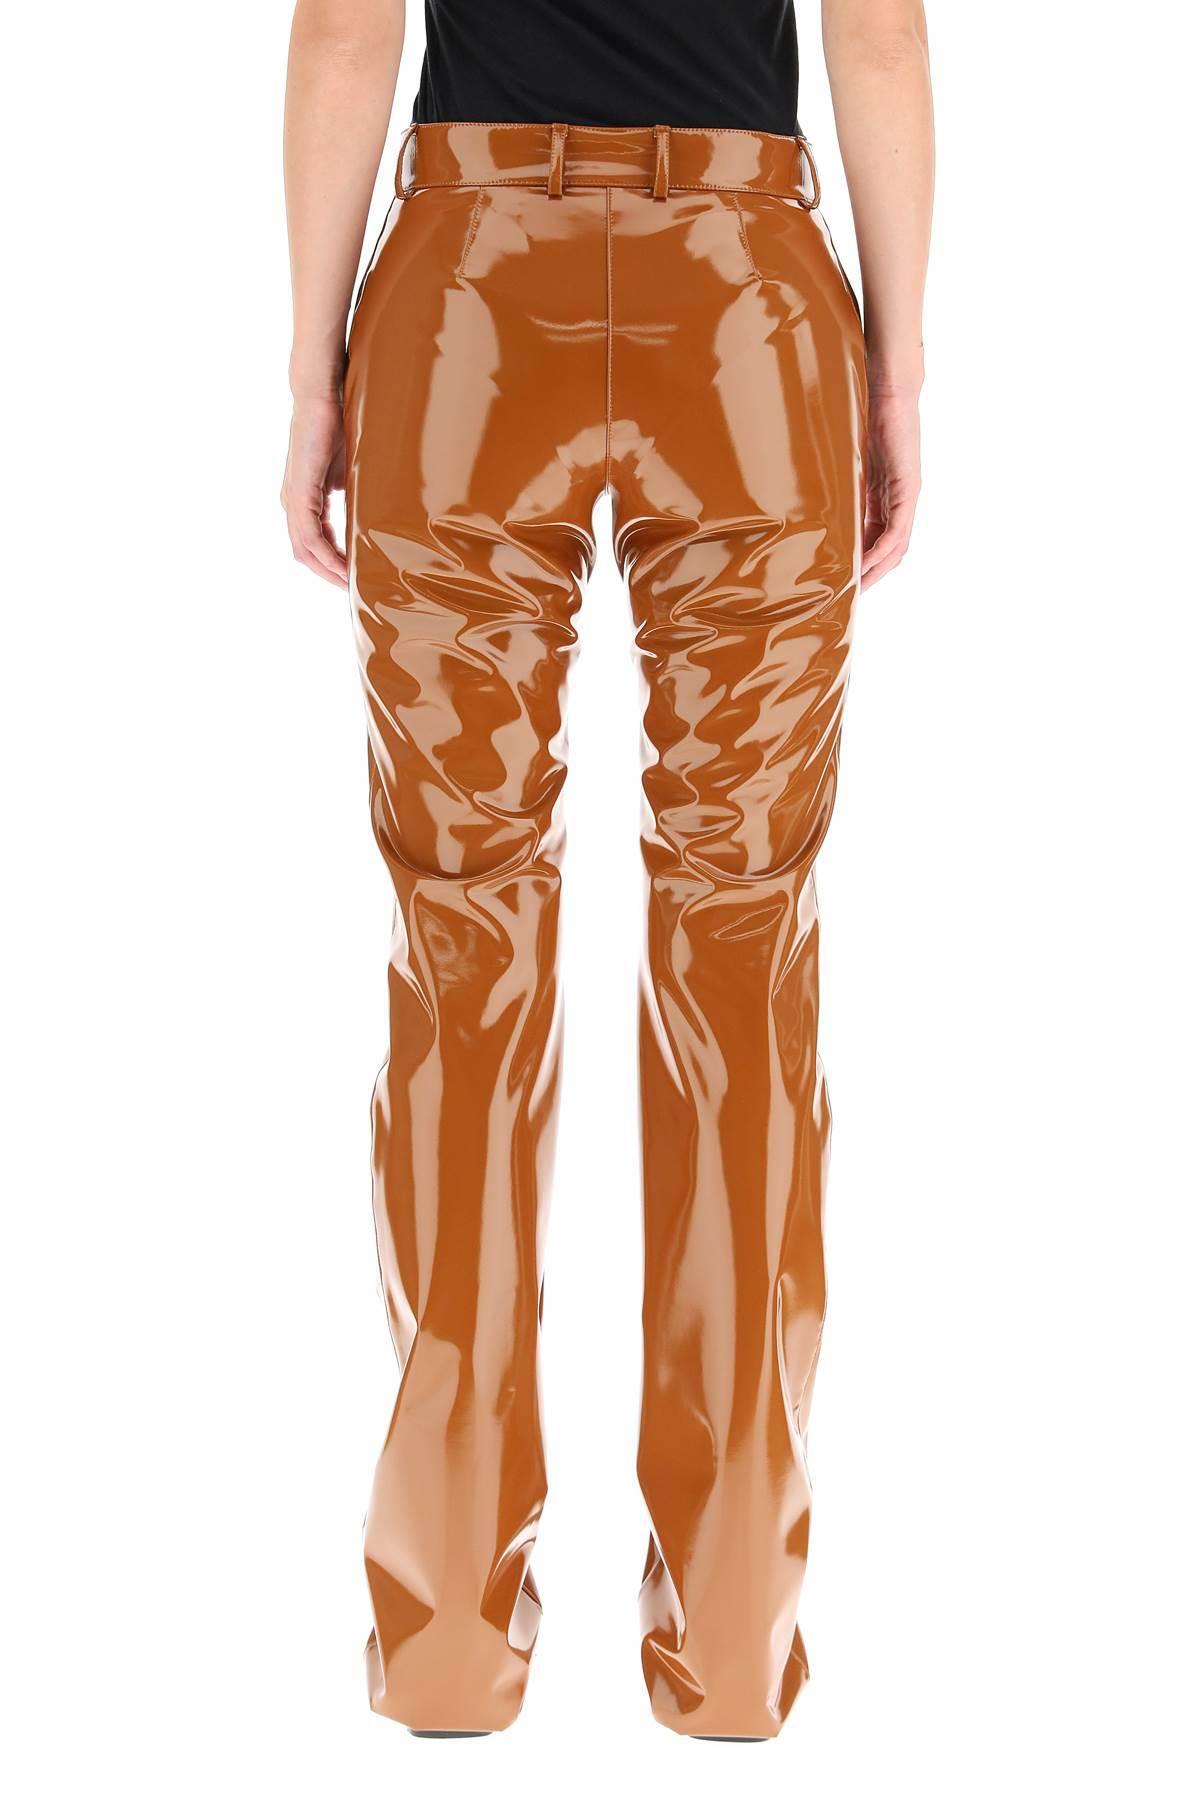 MSGM Vinyl Trousers in Brown - Save 37% - Lyst